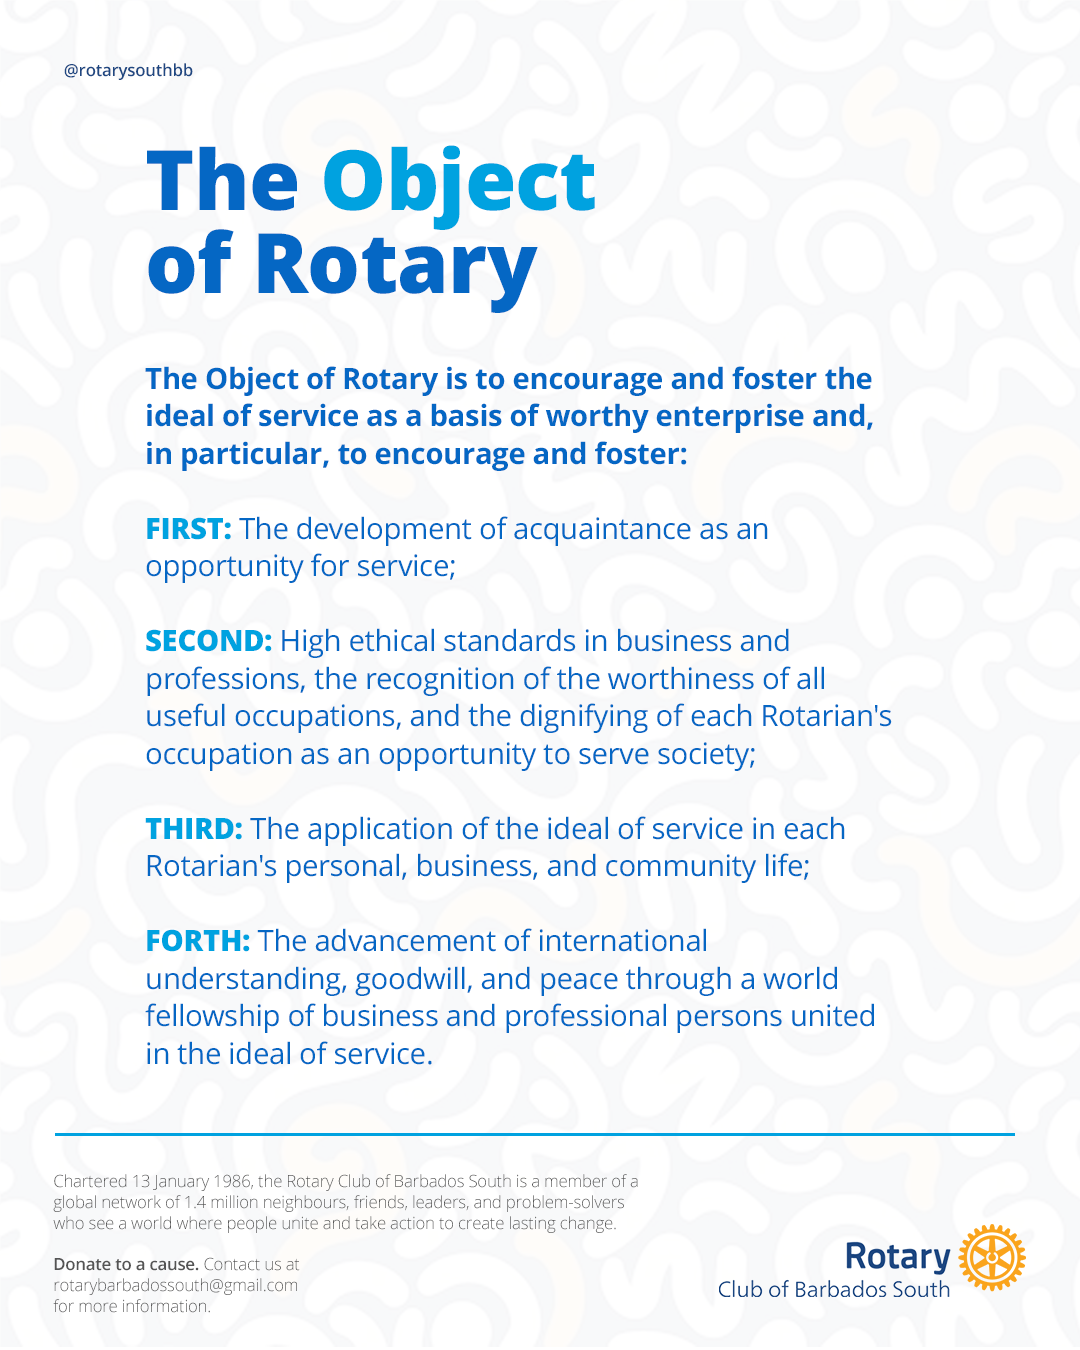 Image of the Object of Rotary: The Object of Rotary is to encourage and foster the ideal of service as a basis of worthy enterprise and, in particular, to encourage and foster:  FIRST: The development of acquaintance as an opportunity for service;   SECOND: High ethical standards in business and professions, the recognition of the worthiness of all useful occupations, and the dignifying of each Rotarian's occupation as an opportunity to serve society;  THIRD: The application of the ideal of service in each Rotarian's personal, business, and community life;   FORTH: The advancement of international understanding, goodwill, and peace through a world fellowship of business and professional persons united in the ideal of service.